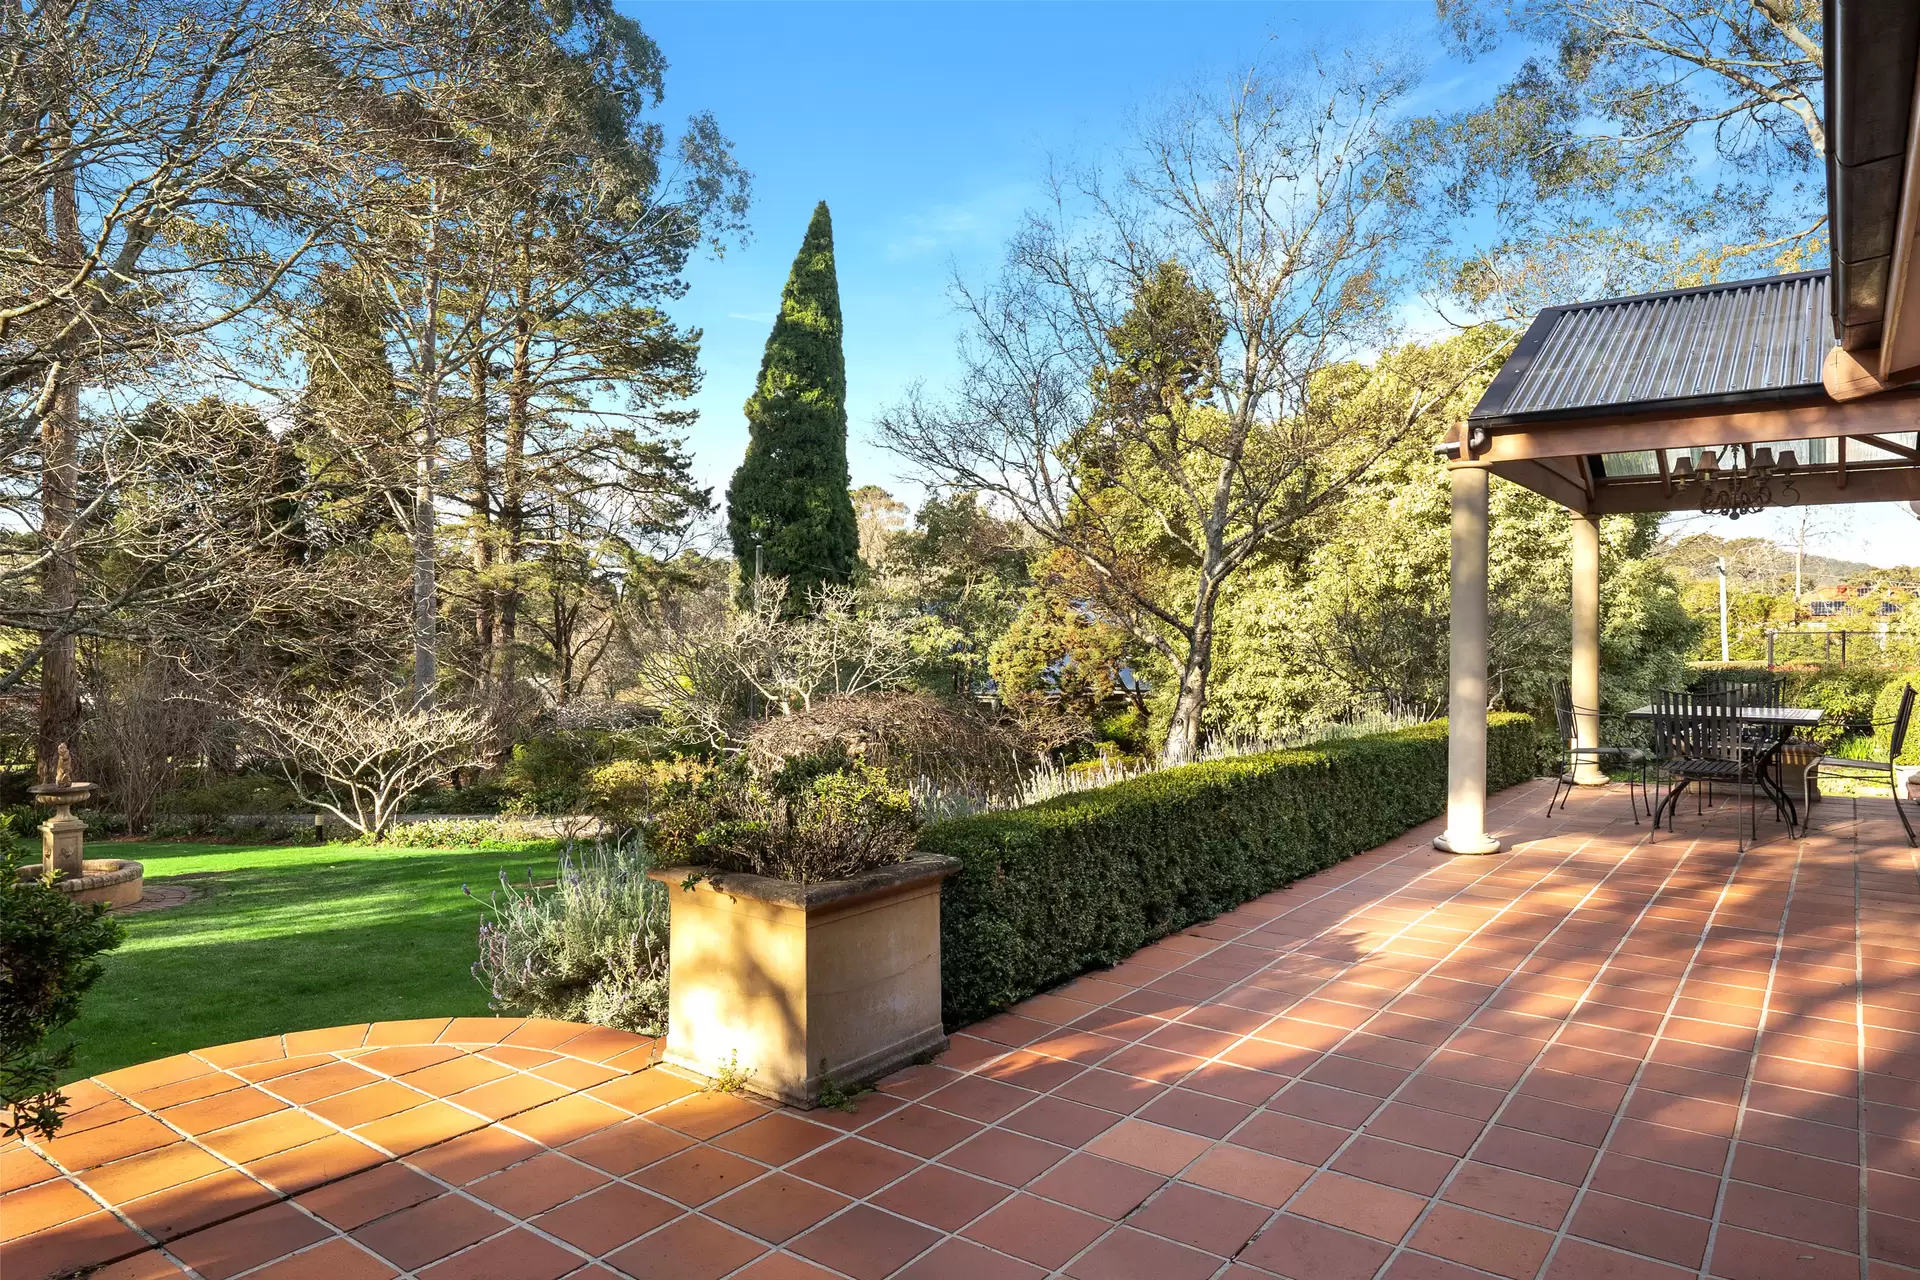 Photo #4: 38 Centennial Road, Bowral - Sold by Drew Lindsay Sotheby's International Realty